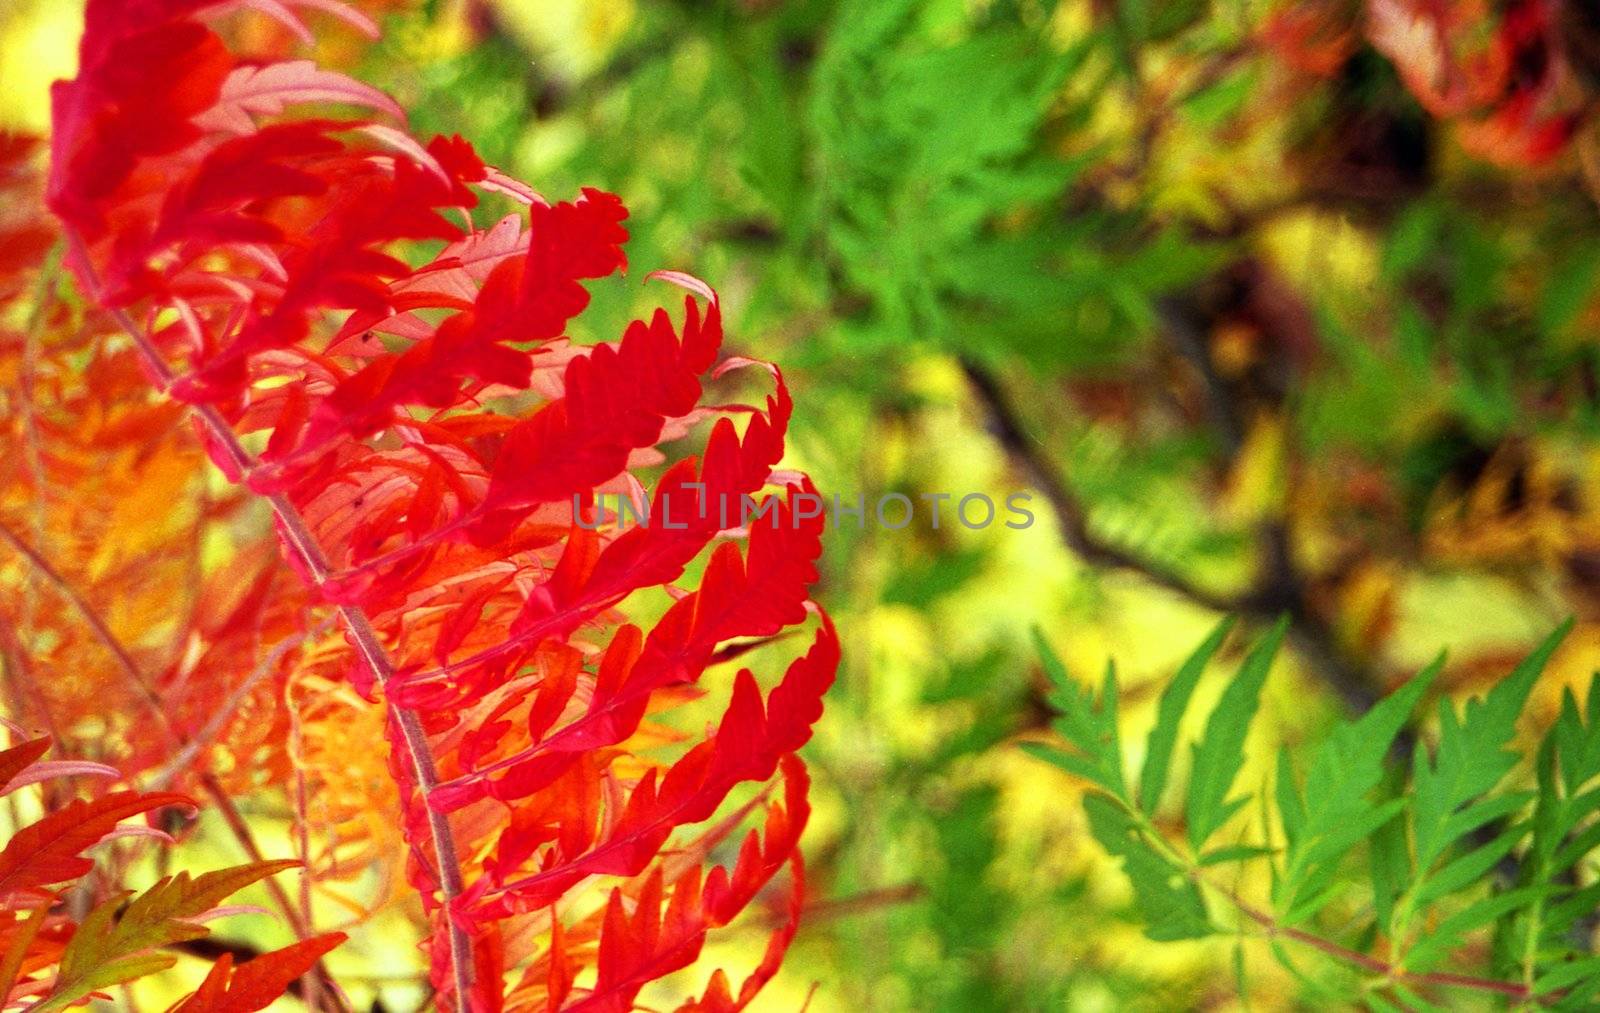 Brightly colored ferns in close-up